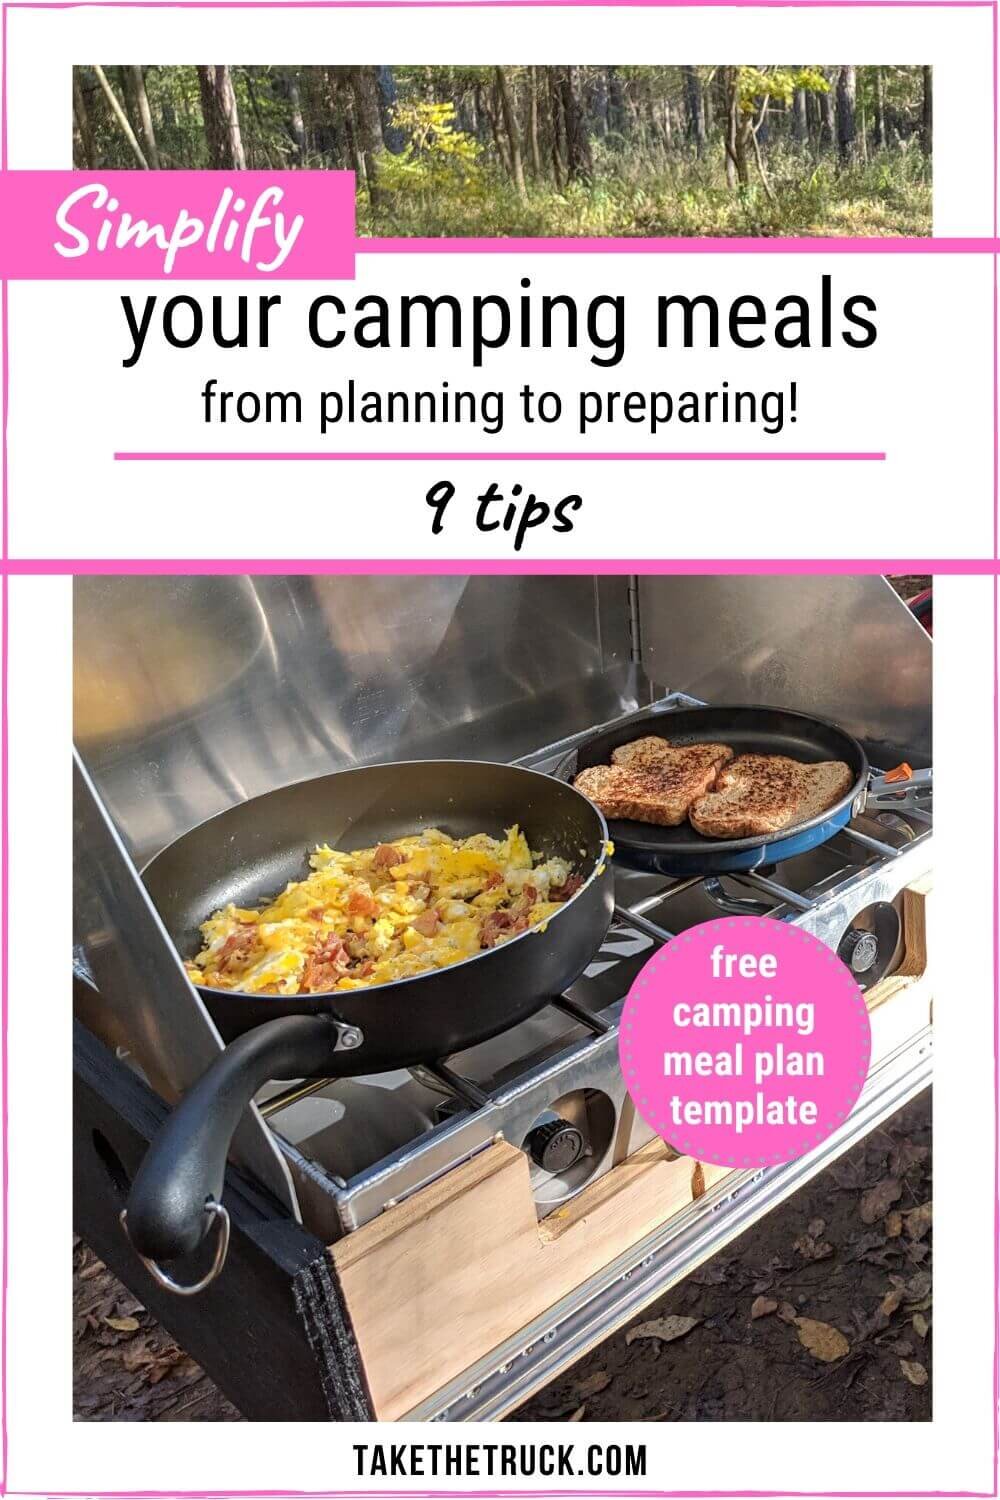 We’ve got nine tips to get you started on planning and preparing easy camping meals for your next camping trip. During your adventure, you can have stress-free food options ready to go! 